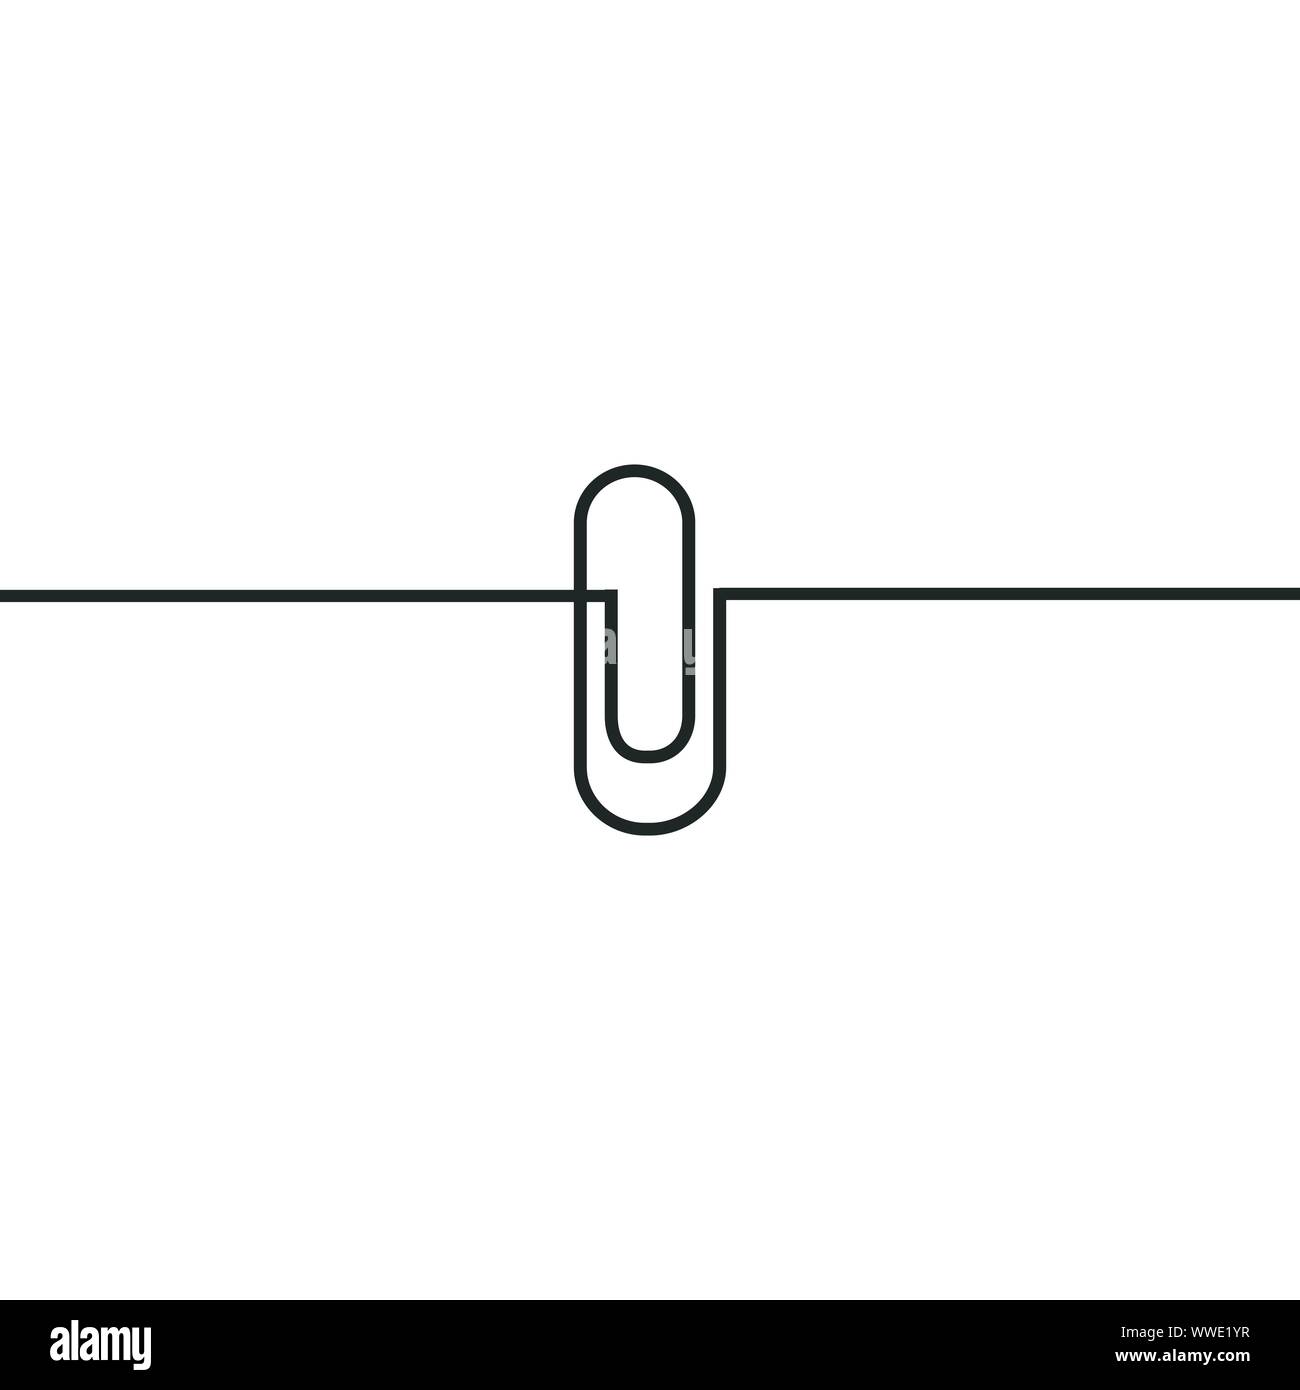 Continuous line drawing of paper clip. Attach icon. Template for your design works. Stock Vector illustration isolated on white background. Stock Vector